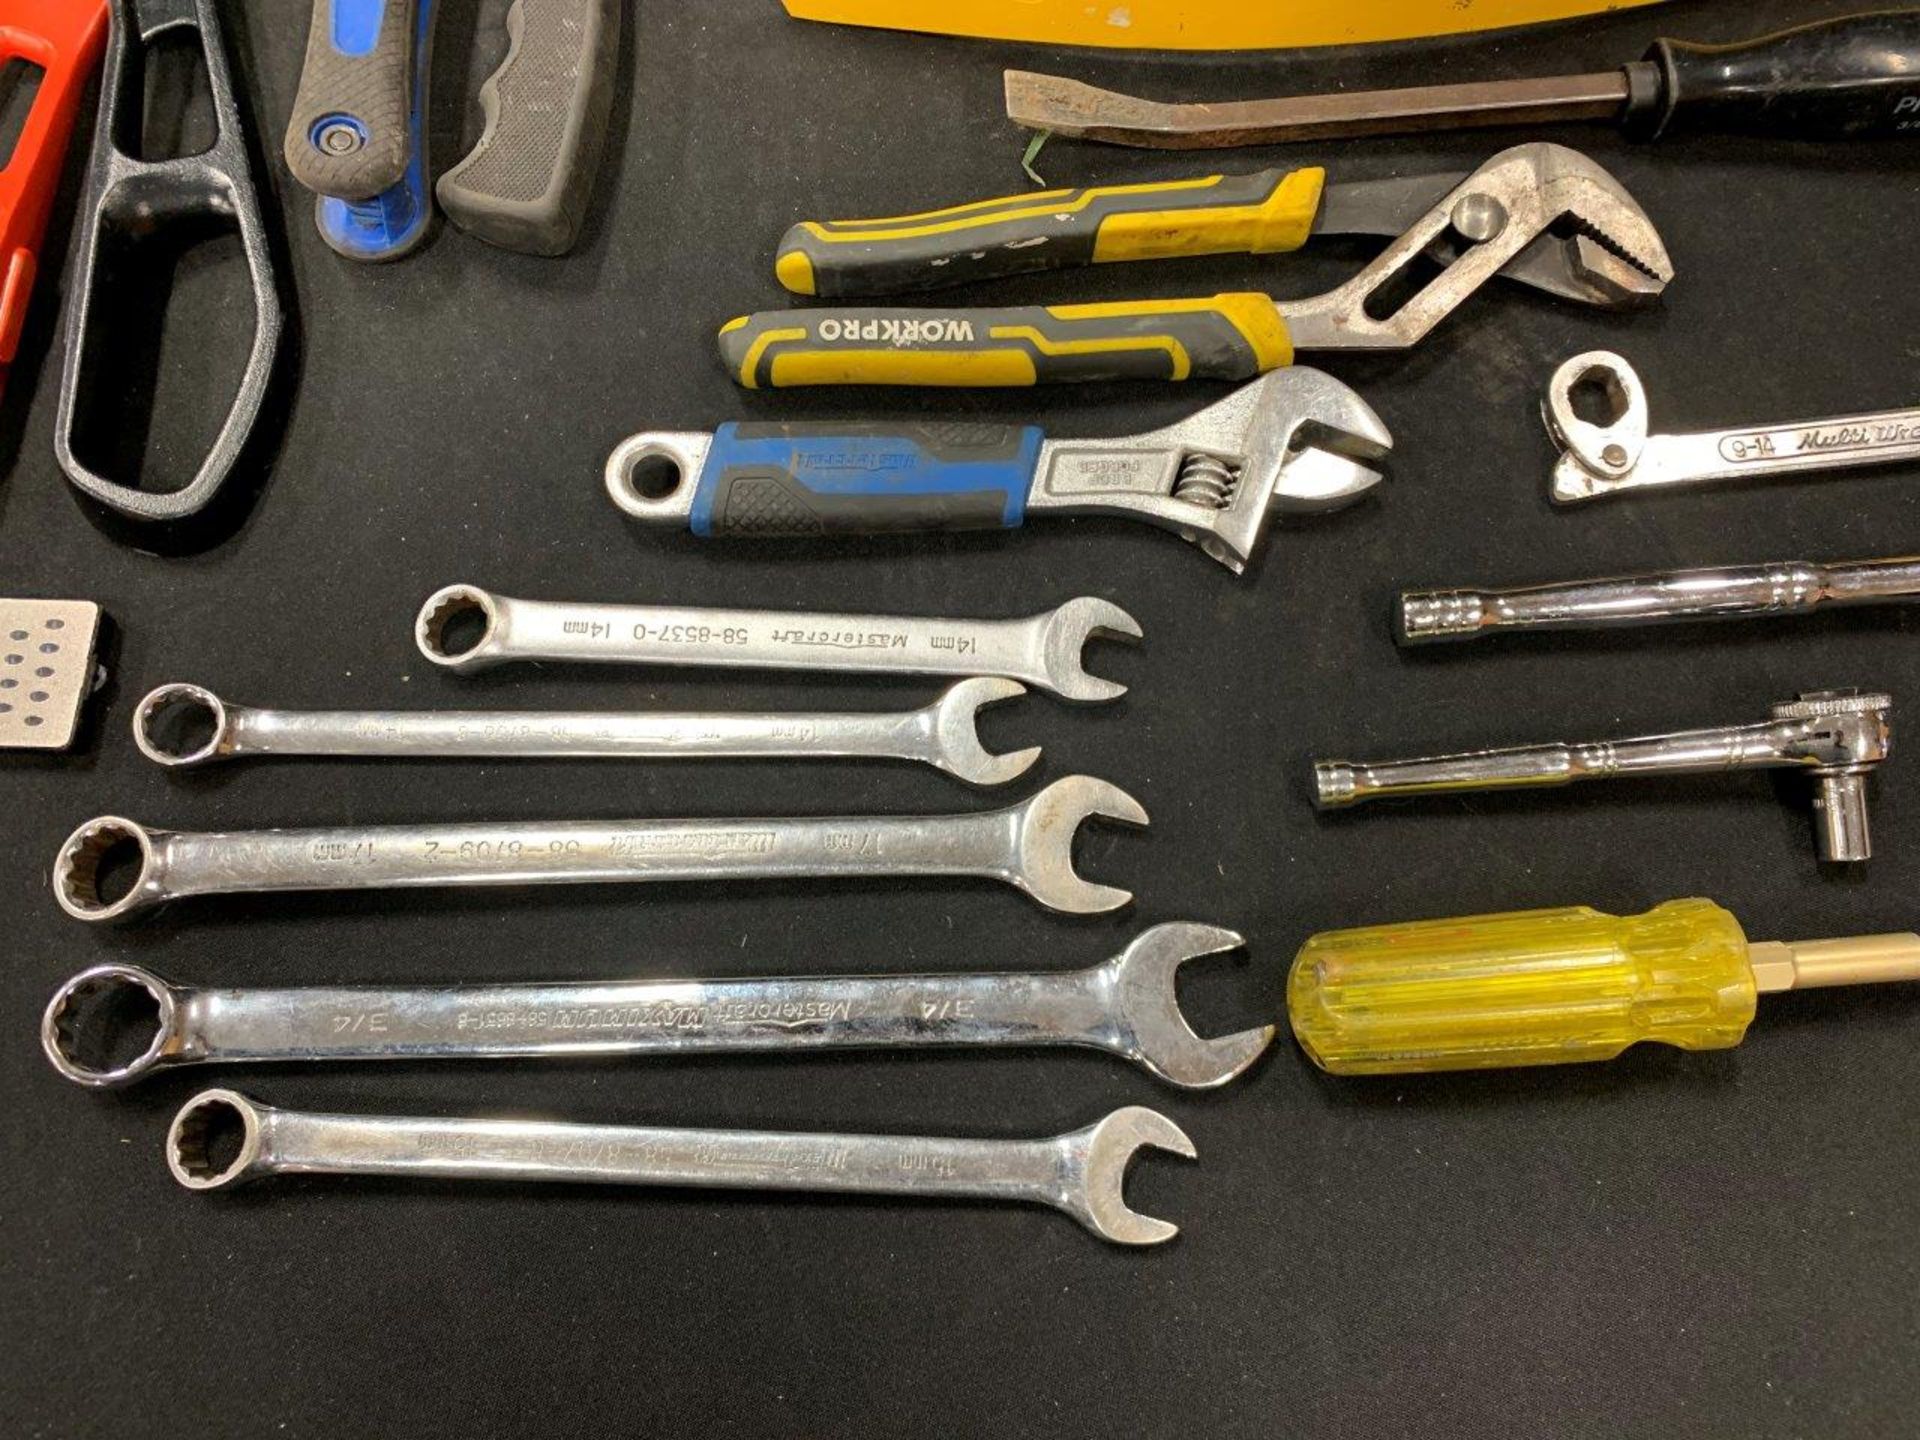 L/O ASSORTED HAND TOOLS, SAWS, SNIPS, PRY BARS, WRENCHES, ETC. - A01 - Image 4 of 7